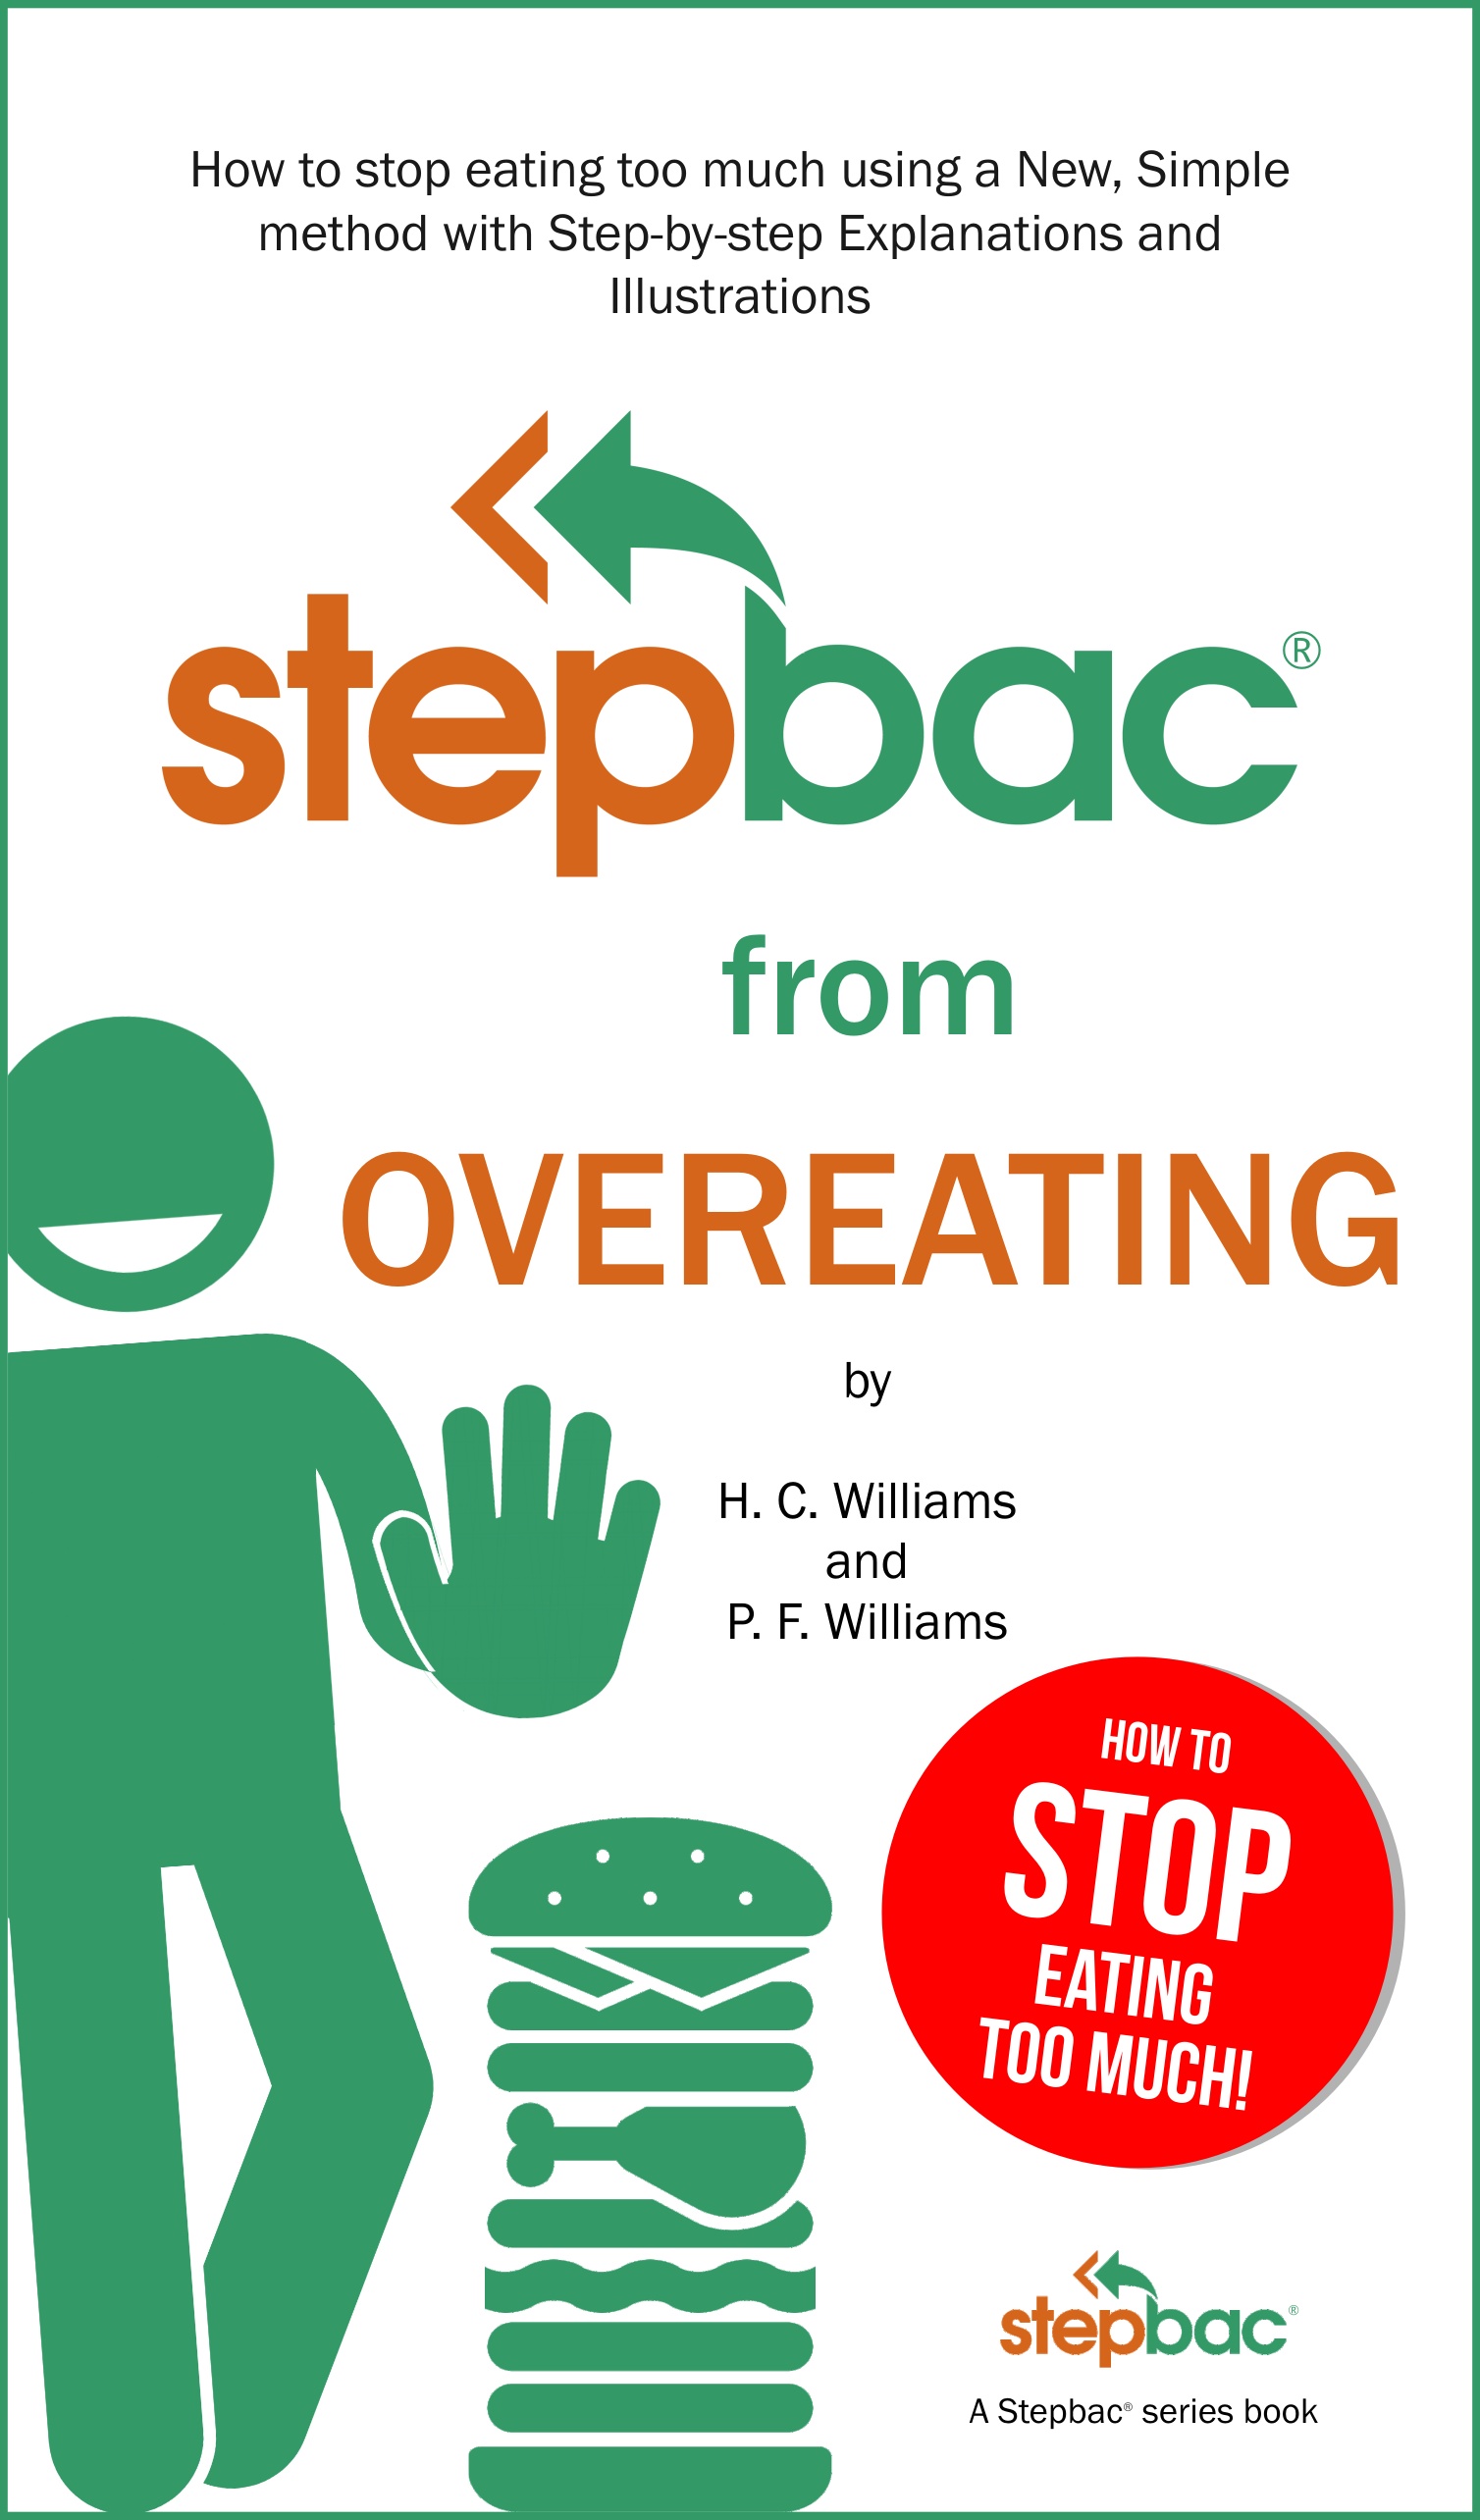 Stepbac from Overeating ebook cover